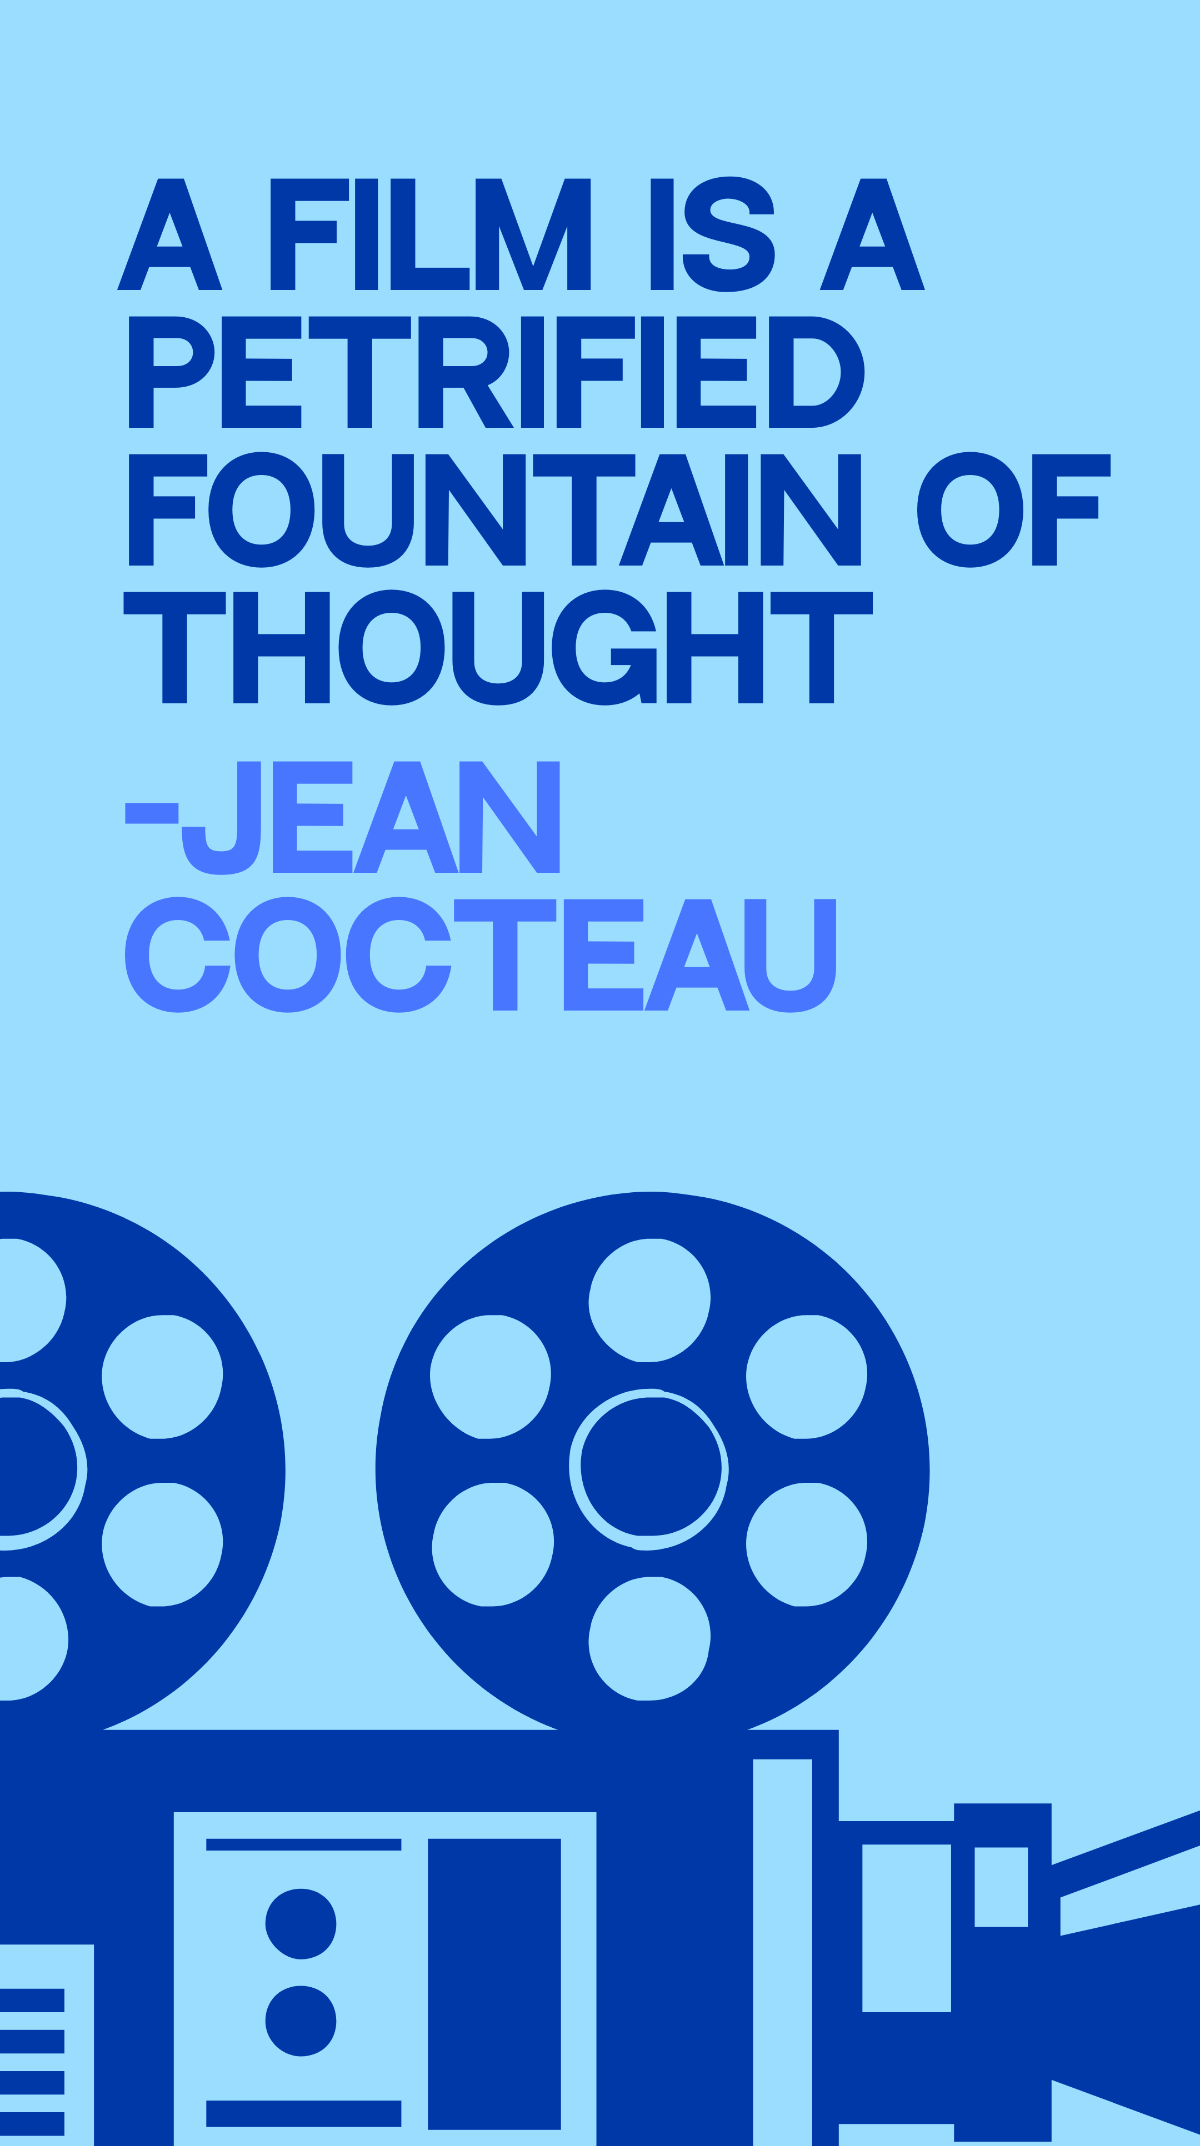 Jean Cocteau - A film is a petrified fountain of thought